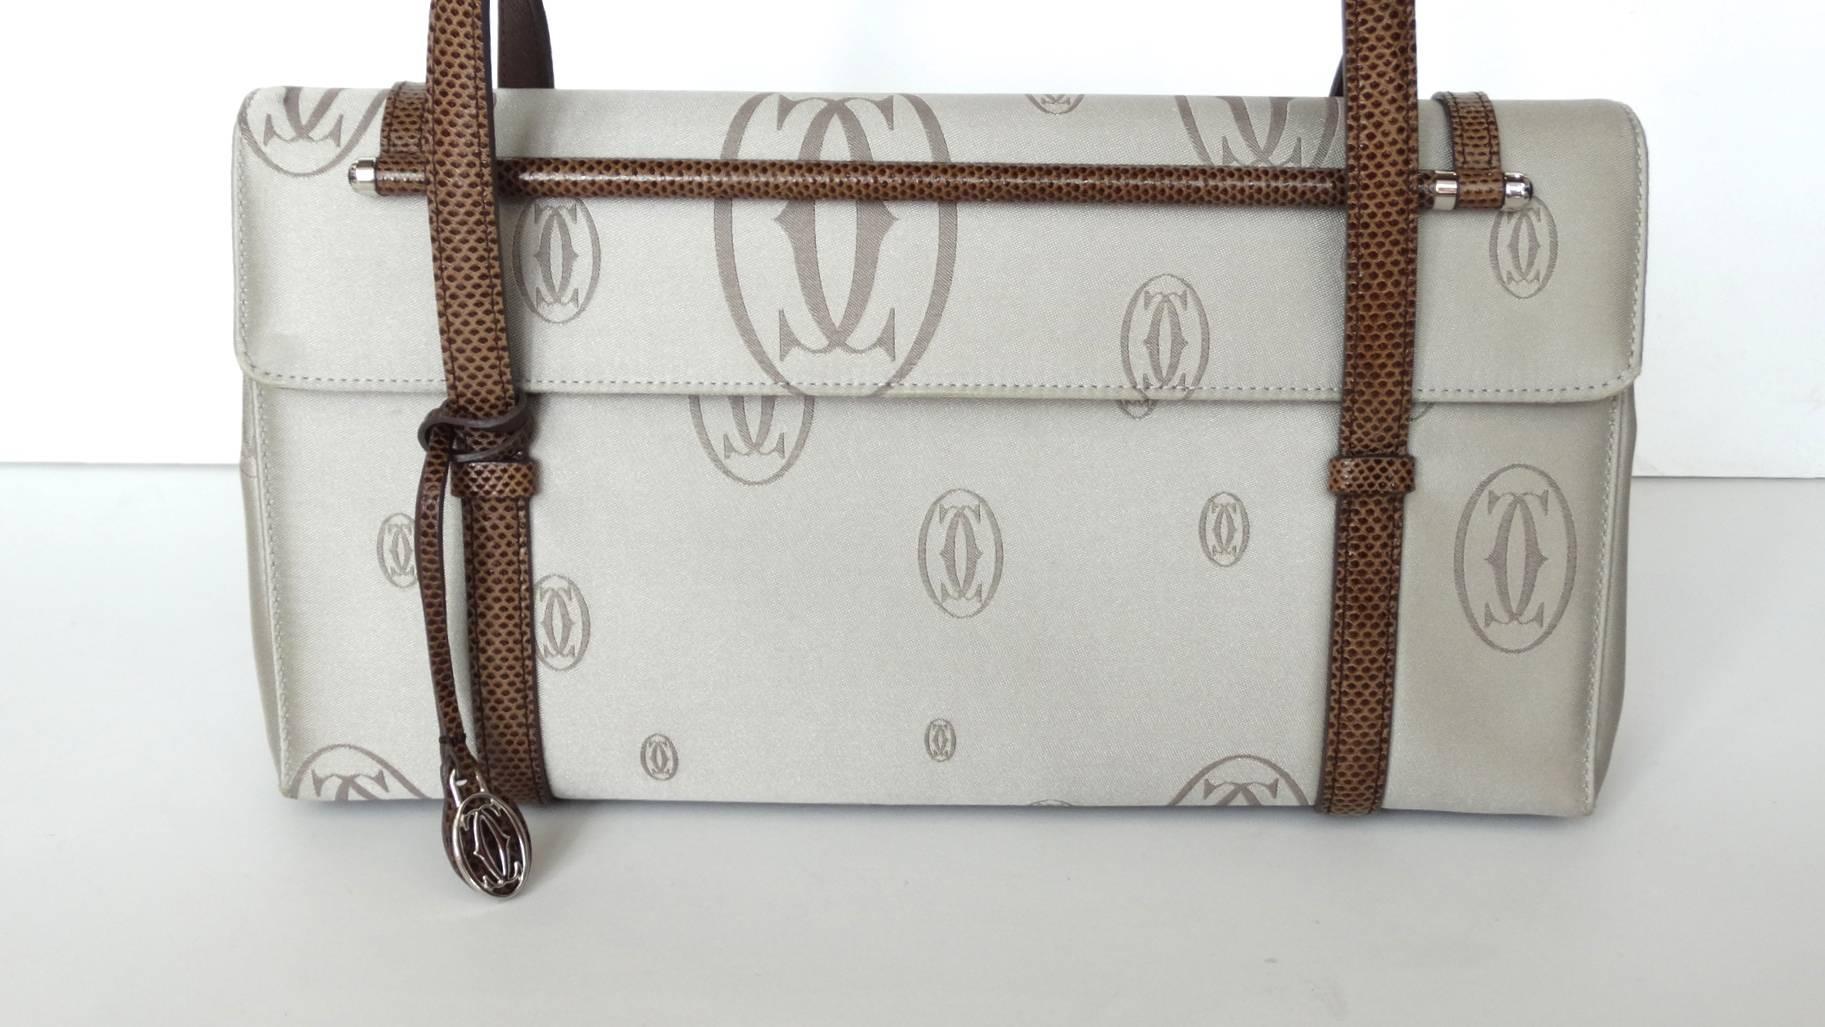 The most adorable Cartier top handle bag from their 2006 Happy Birthday collection! Made of a cool grey satin fabric printed all over with dark grey Cartier logos. Contrasted with brown leather strap and trim. Embellished with a silver Cartier